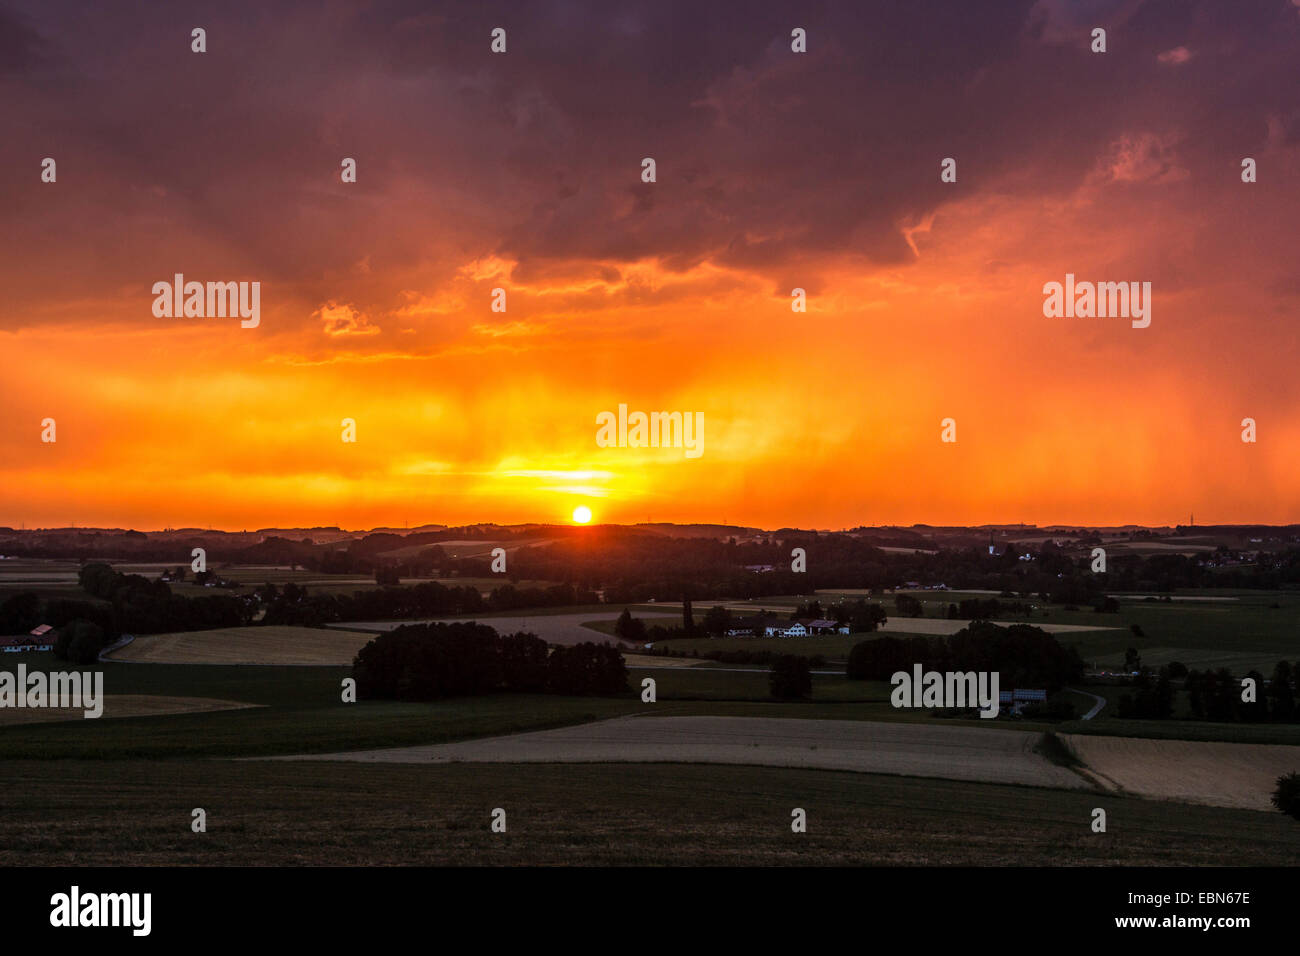 thunderstorm in front of setting sun and red evening sky, Germany, Bavaria, Isental Stock Photo